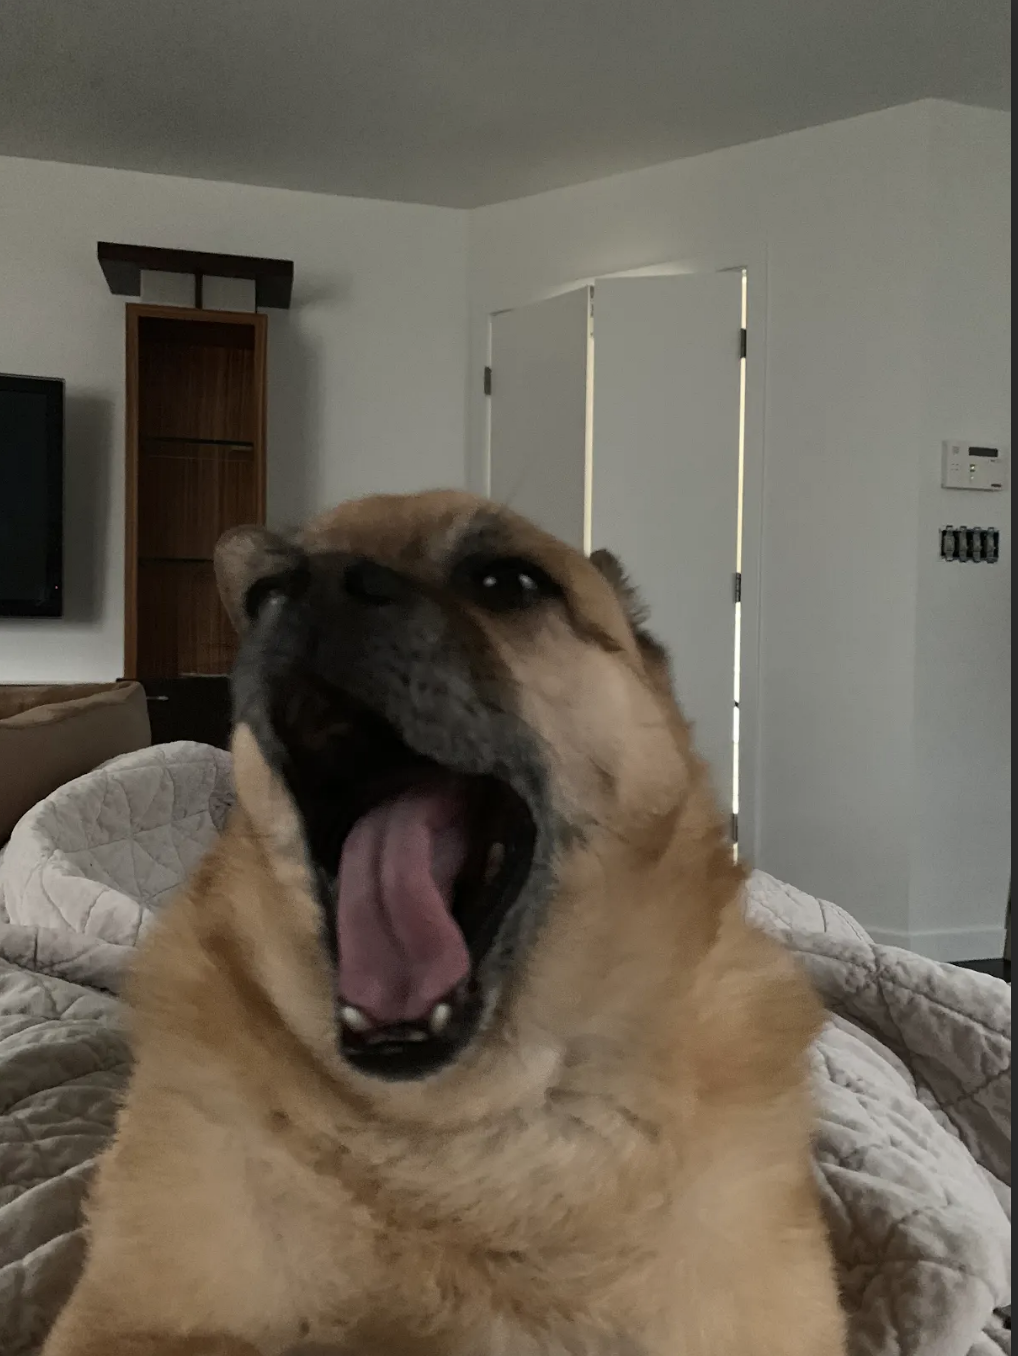 Dog with open mouth as though mid-vocalization, indoors, with a door in the background